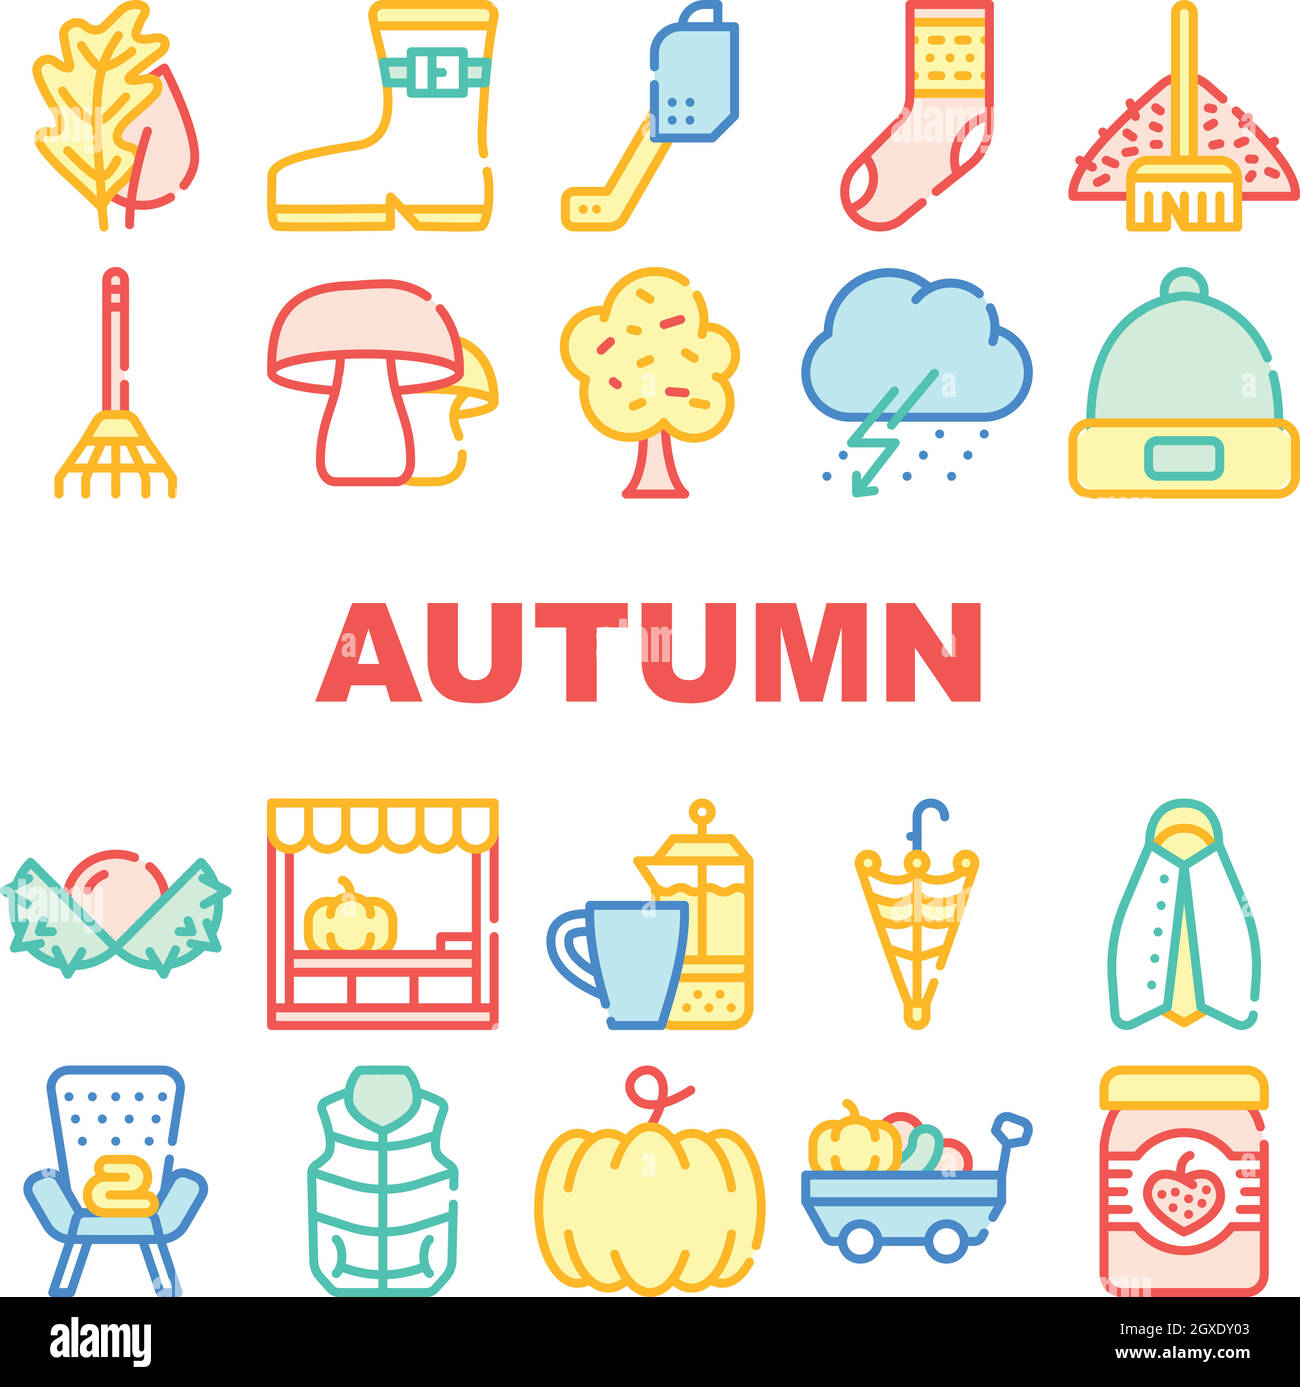 Autumn Season Objects Collection Icons Set Vector Stock Vector